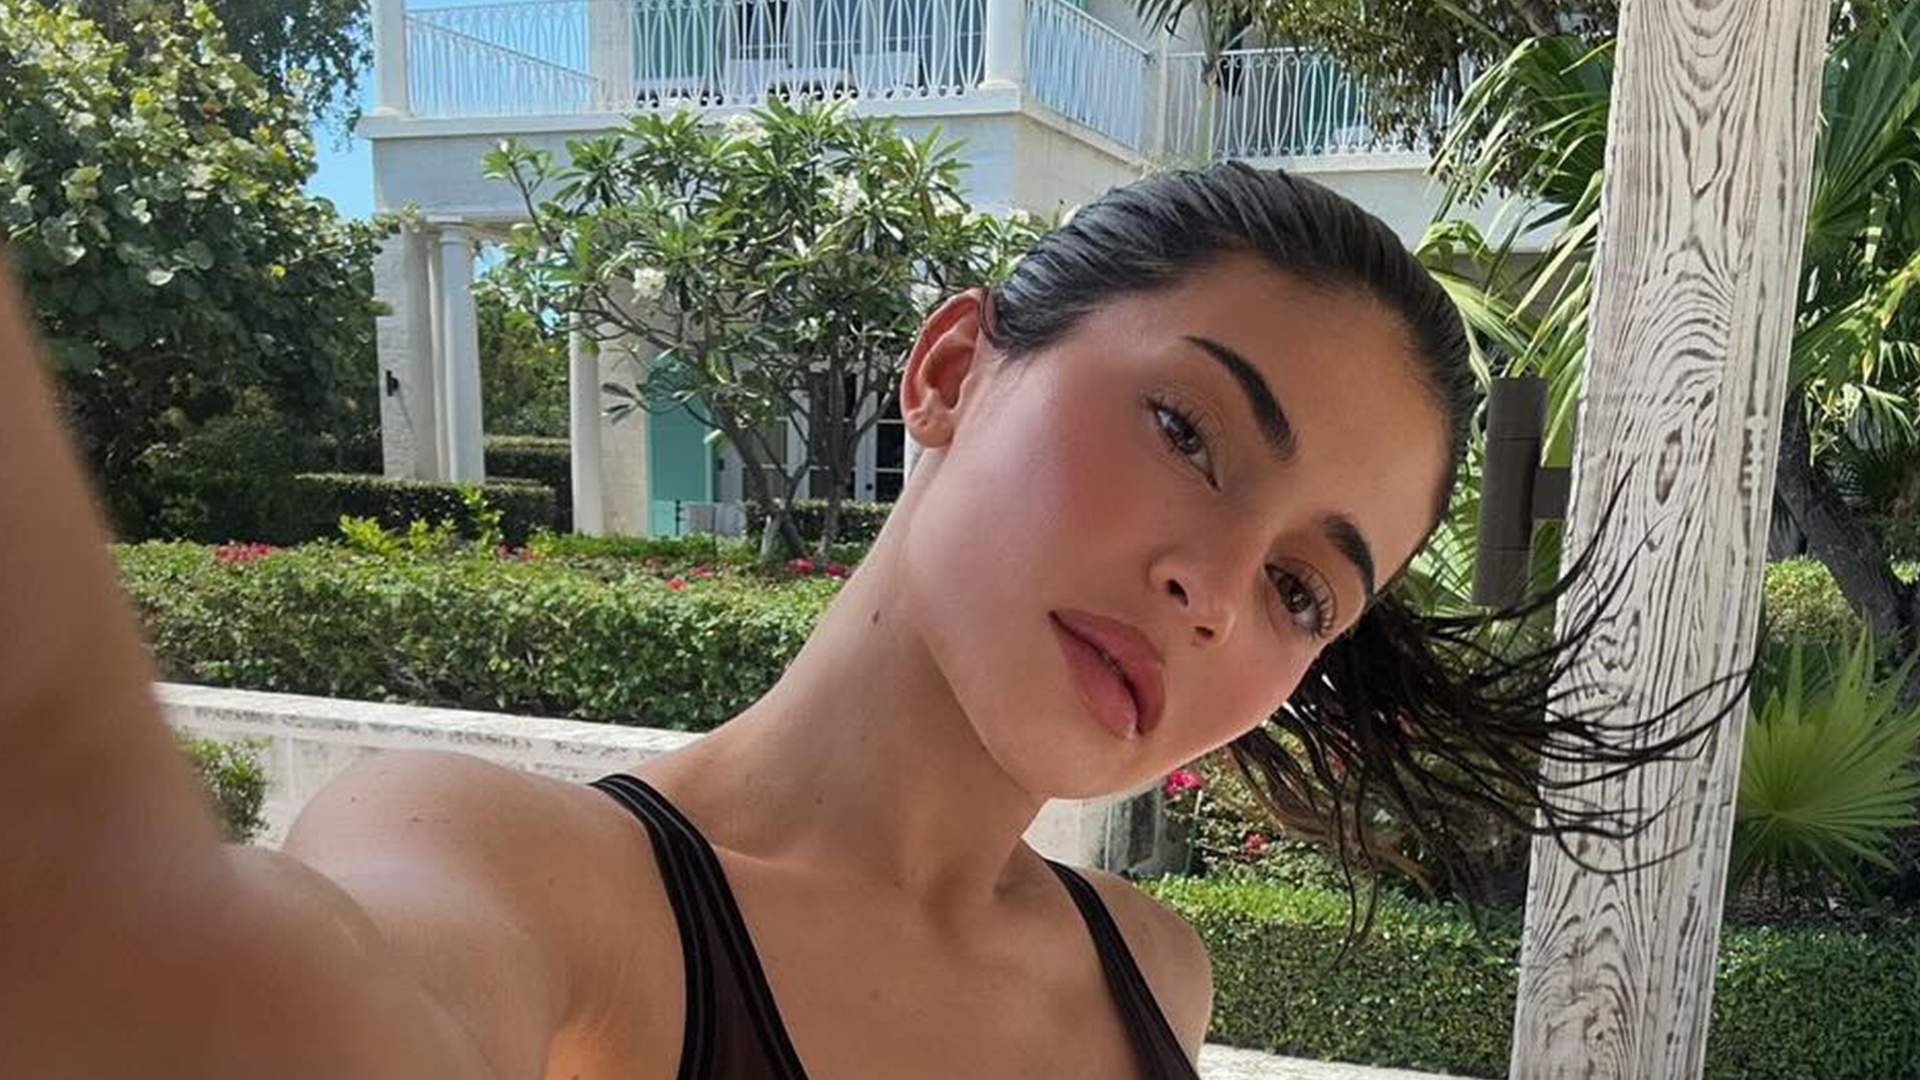 Kylie Jenner is ‘broke’ and ‘housepoor,’ fans claim as she promotes yogawear brand on Turks & Caicos vacation [Video]